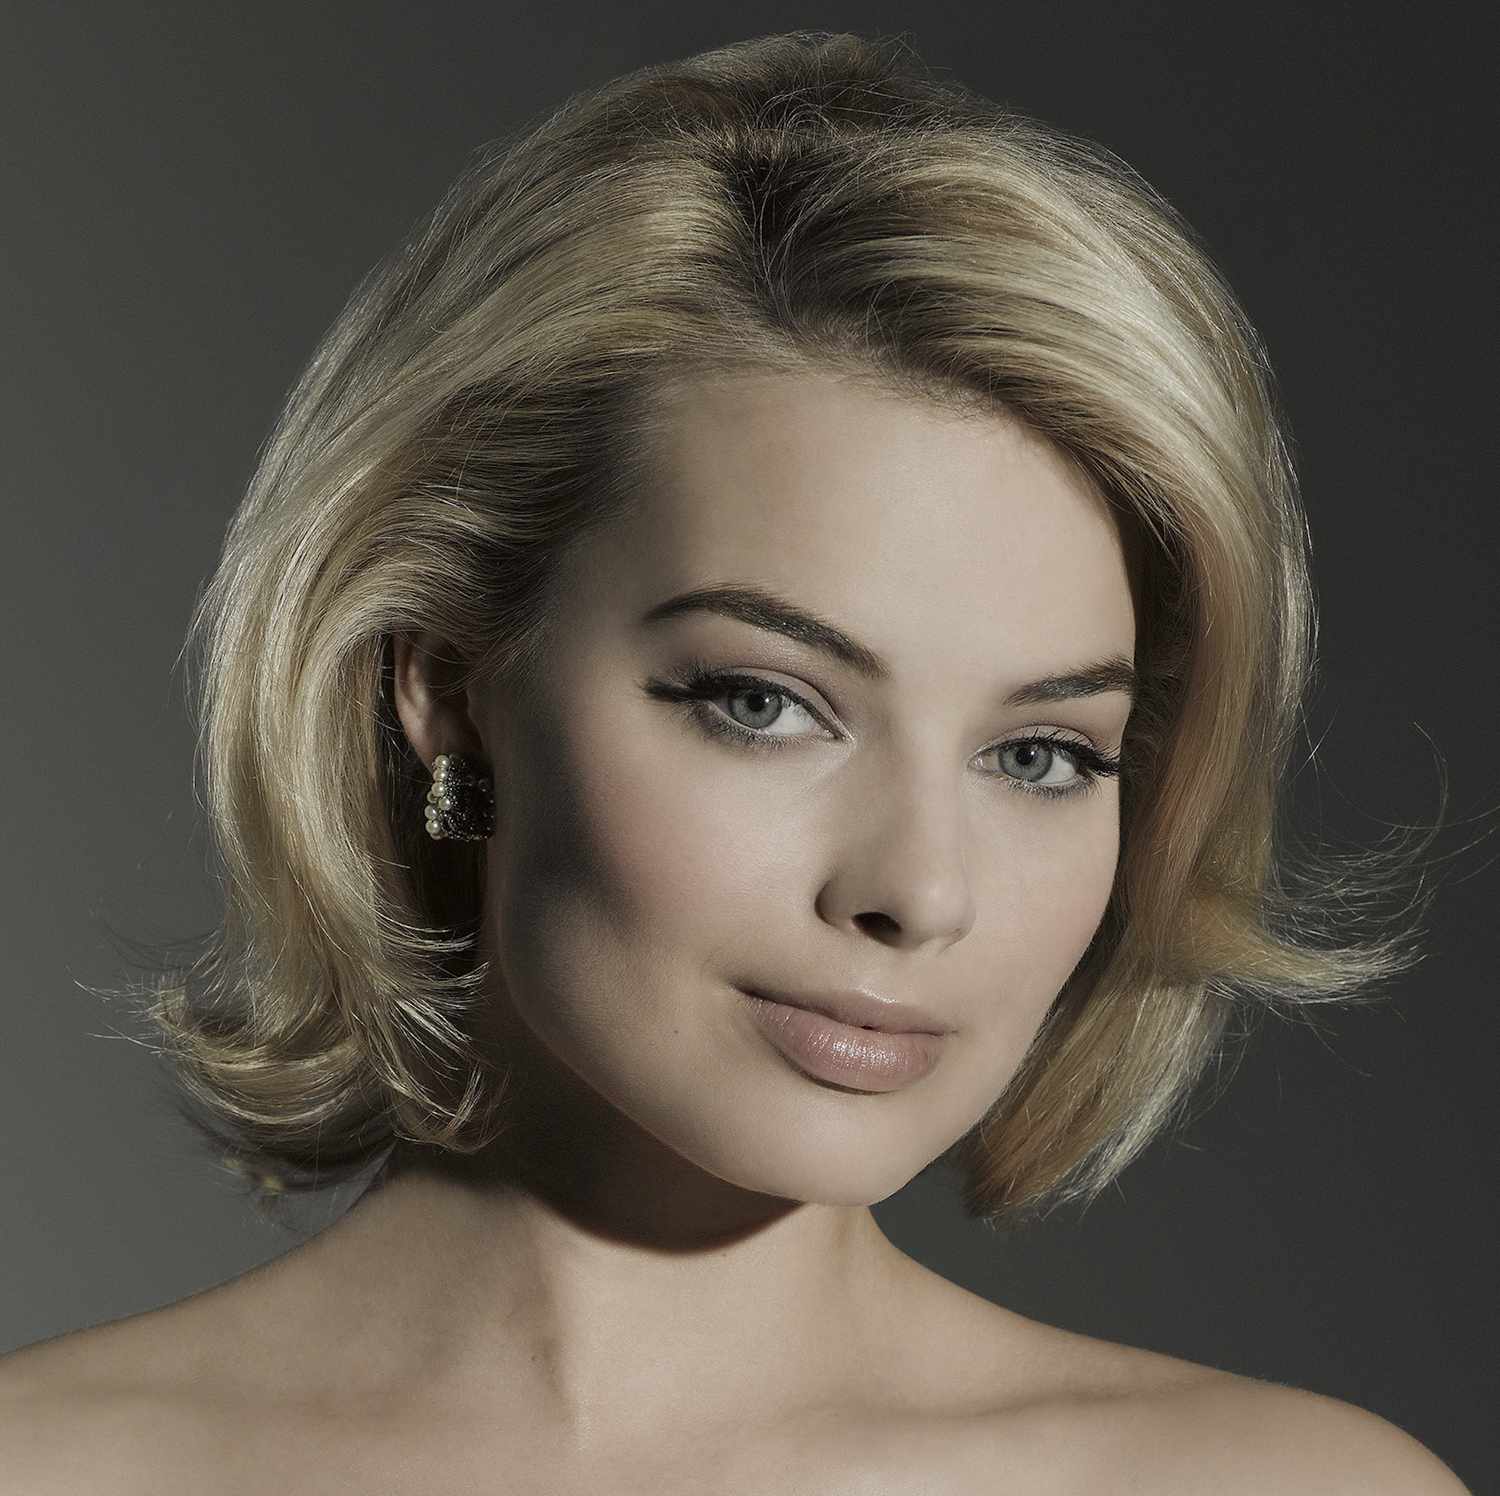 Margot Robbie with a retro bob hairstyle and classic makeup